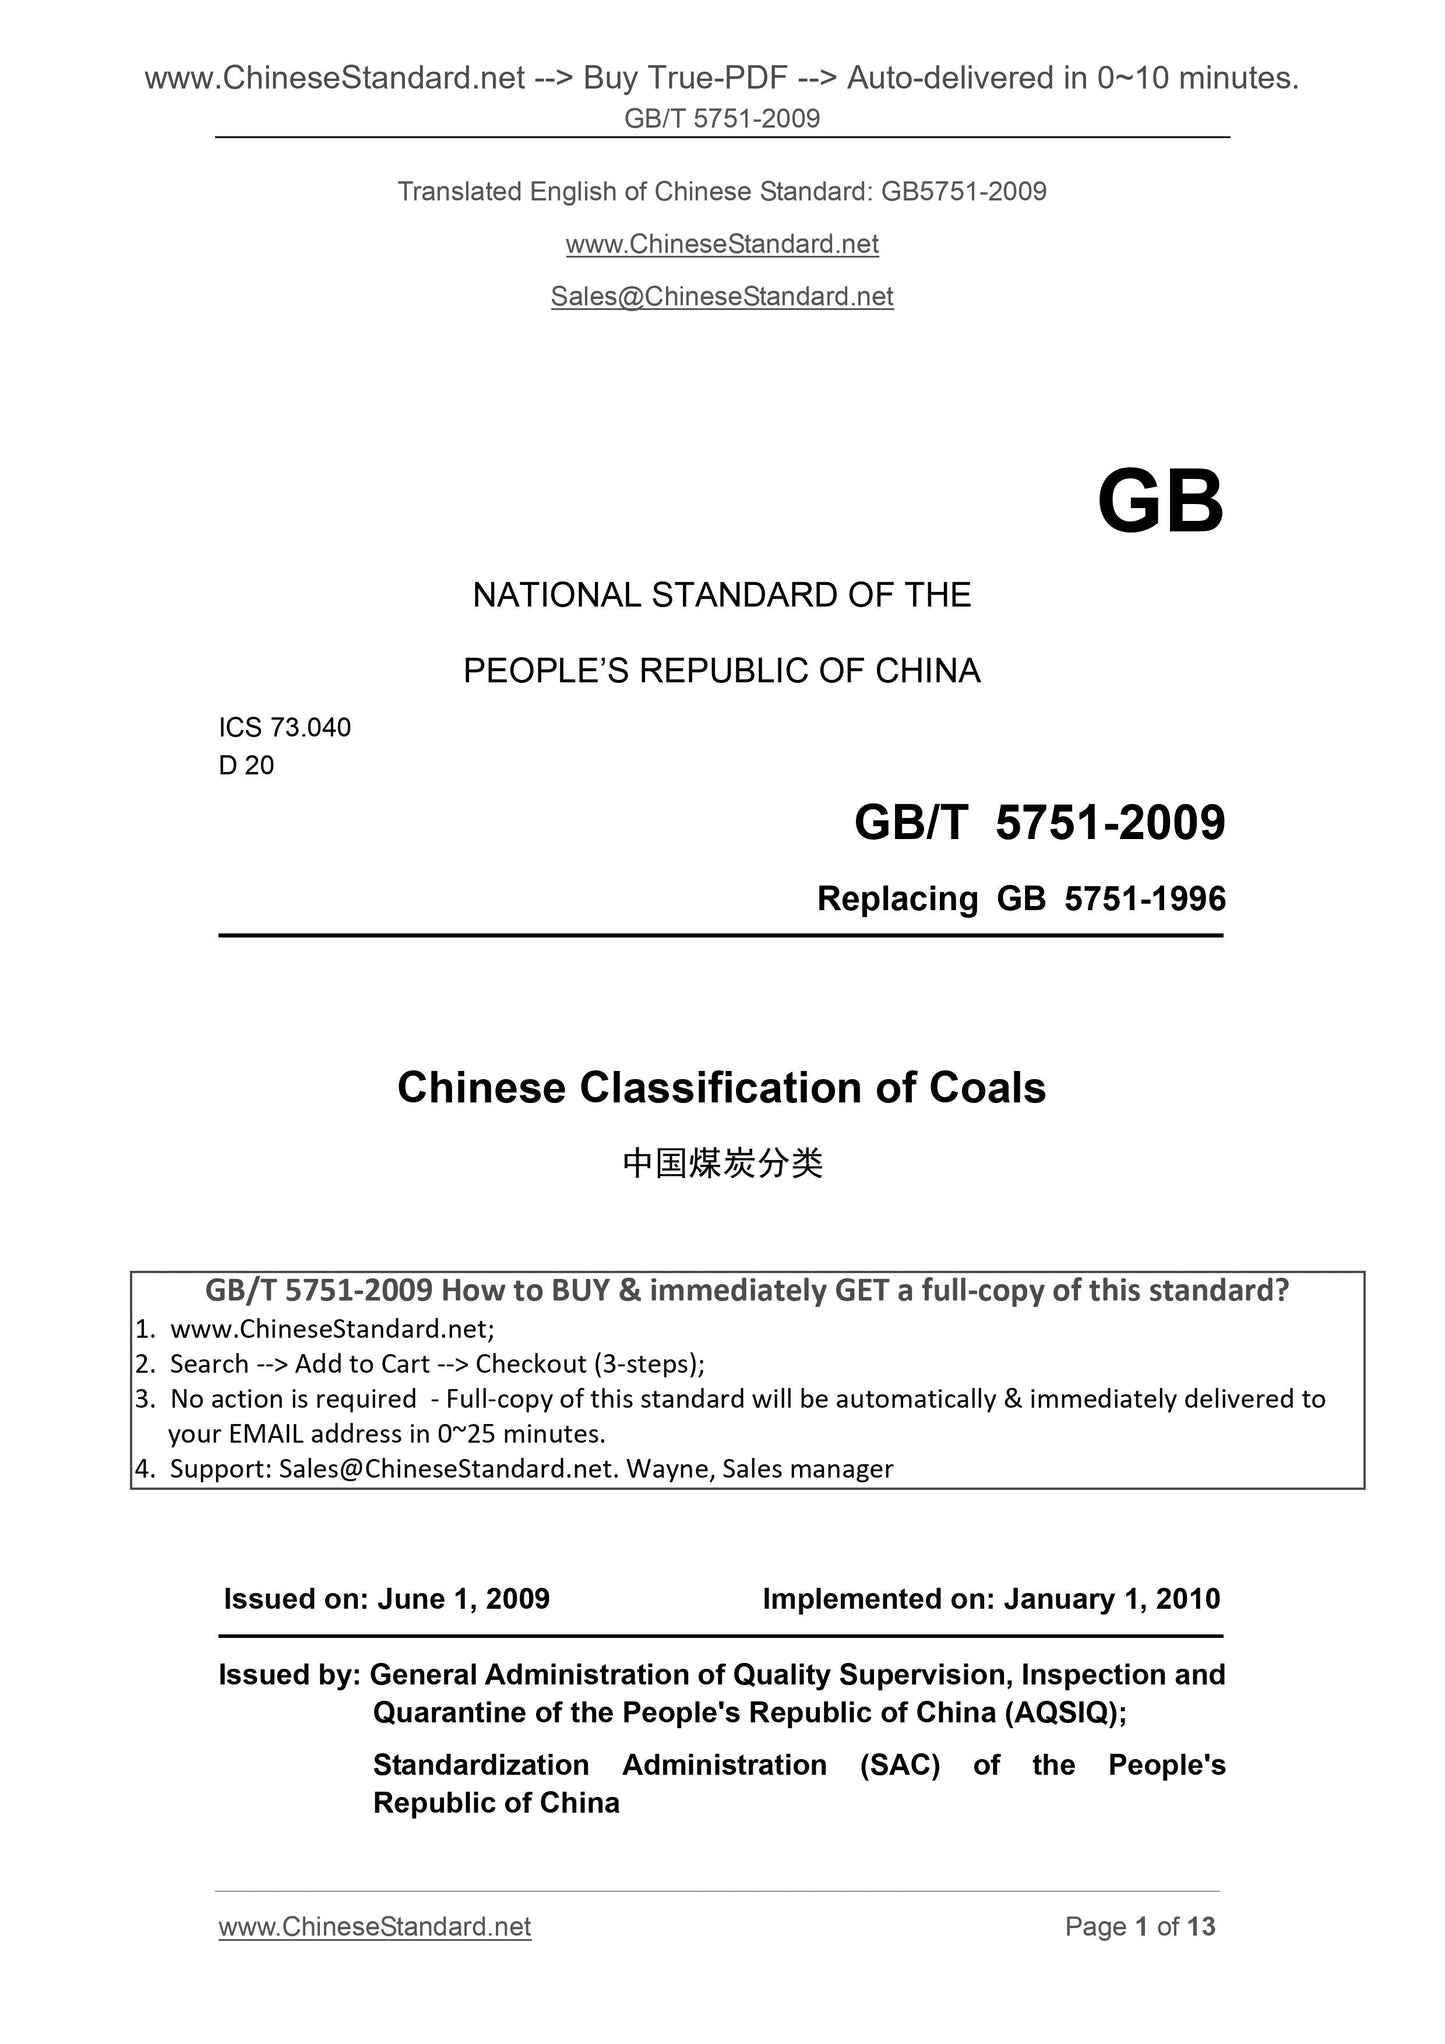 GB/T 5751-2009 Page 1